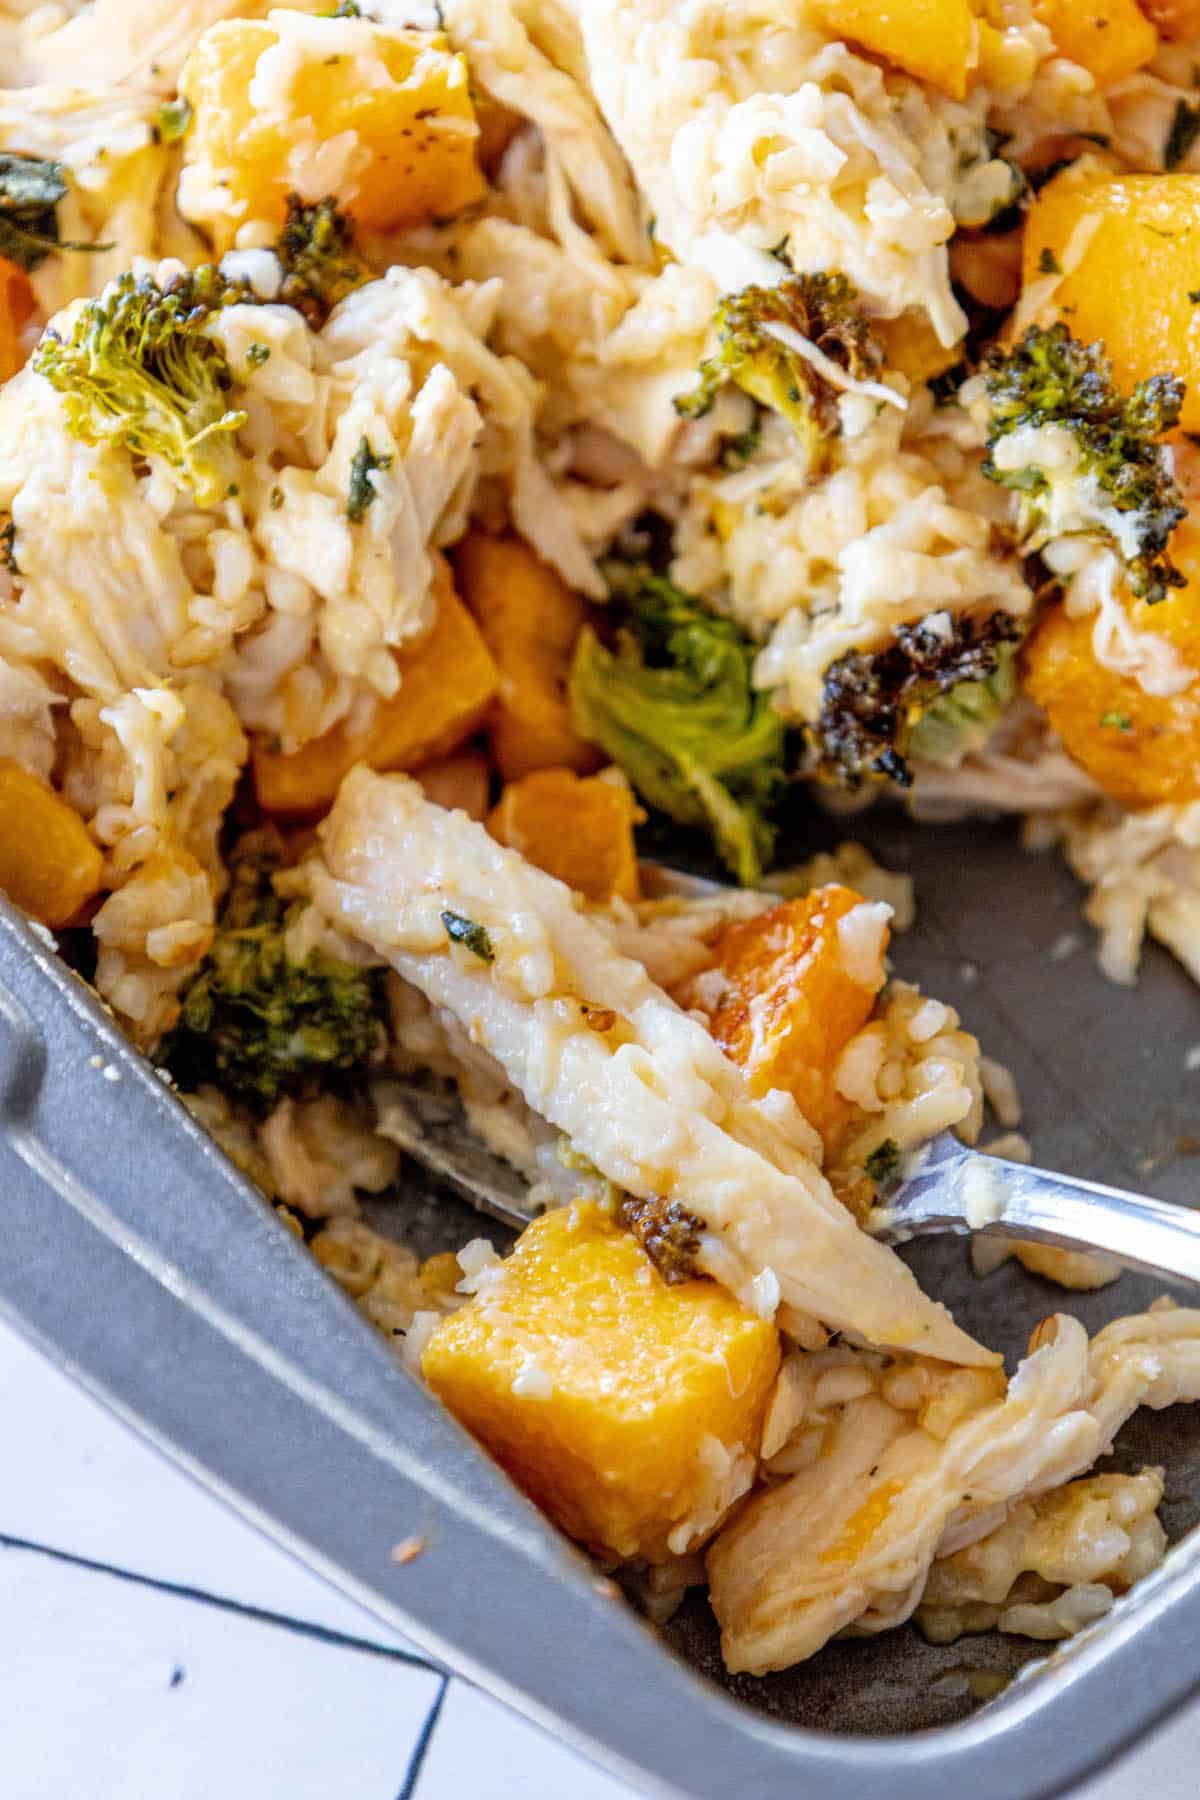 A casserole dish with chicken, broccoli and butternut squash.